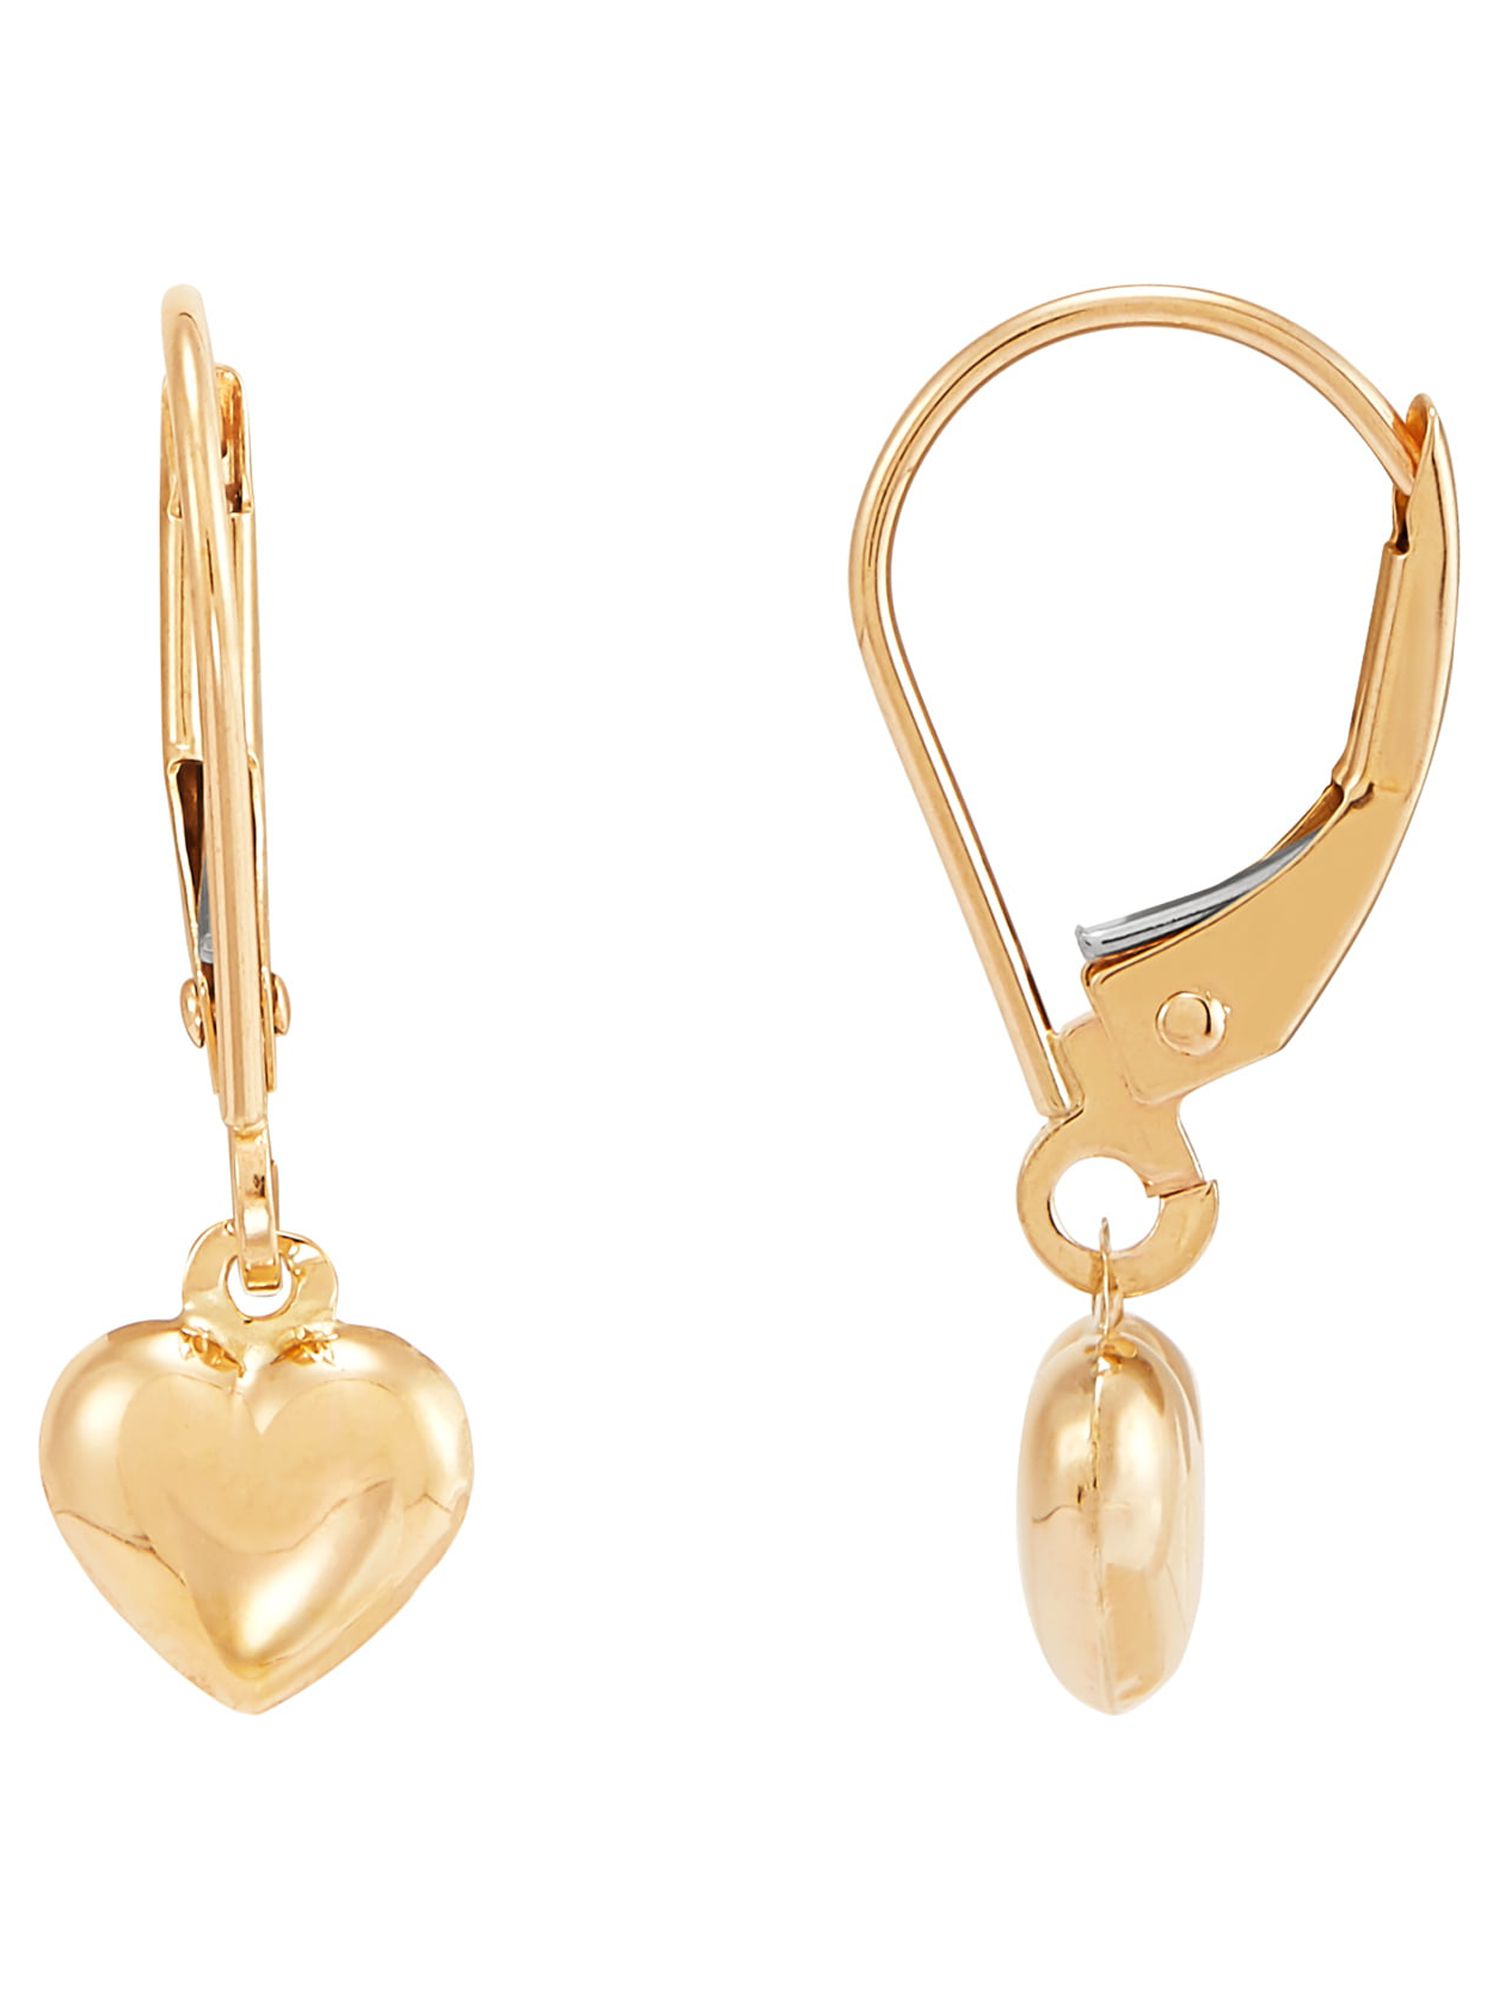 Brilliance Fine Jewelry 10K Yellow Gold Hollow Heart Leverback Earrings - image 2 of 4